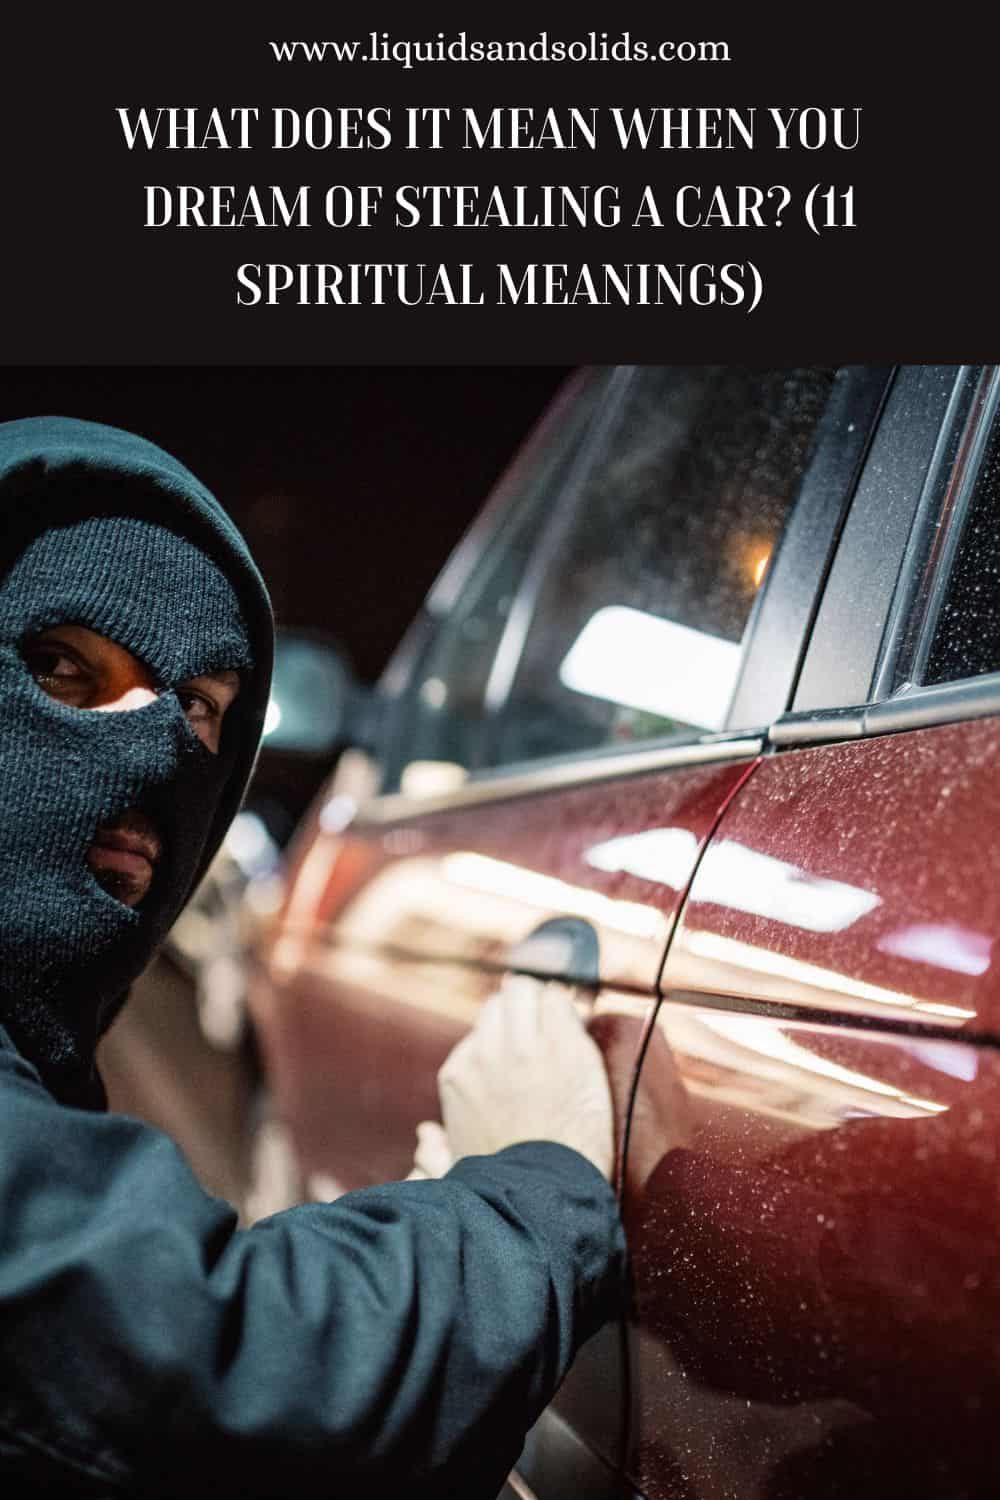 What Does It Mean When You Dream of Stealing a Car? (11 Spiritual Meanings)